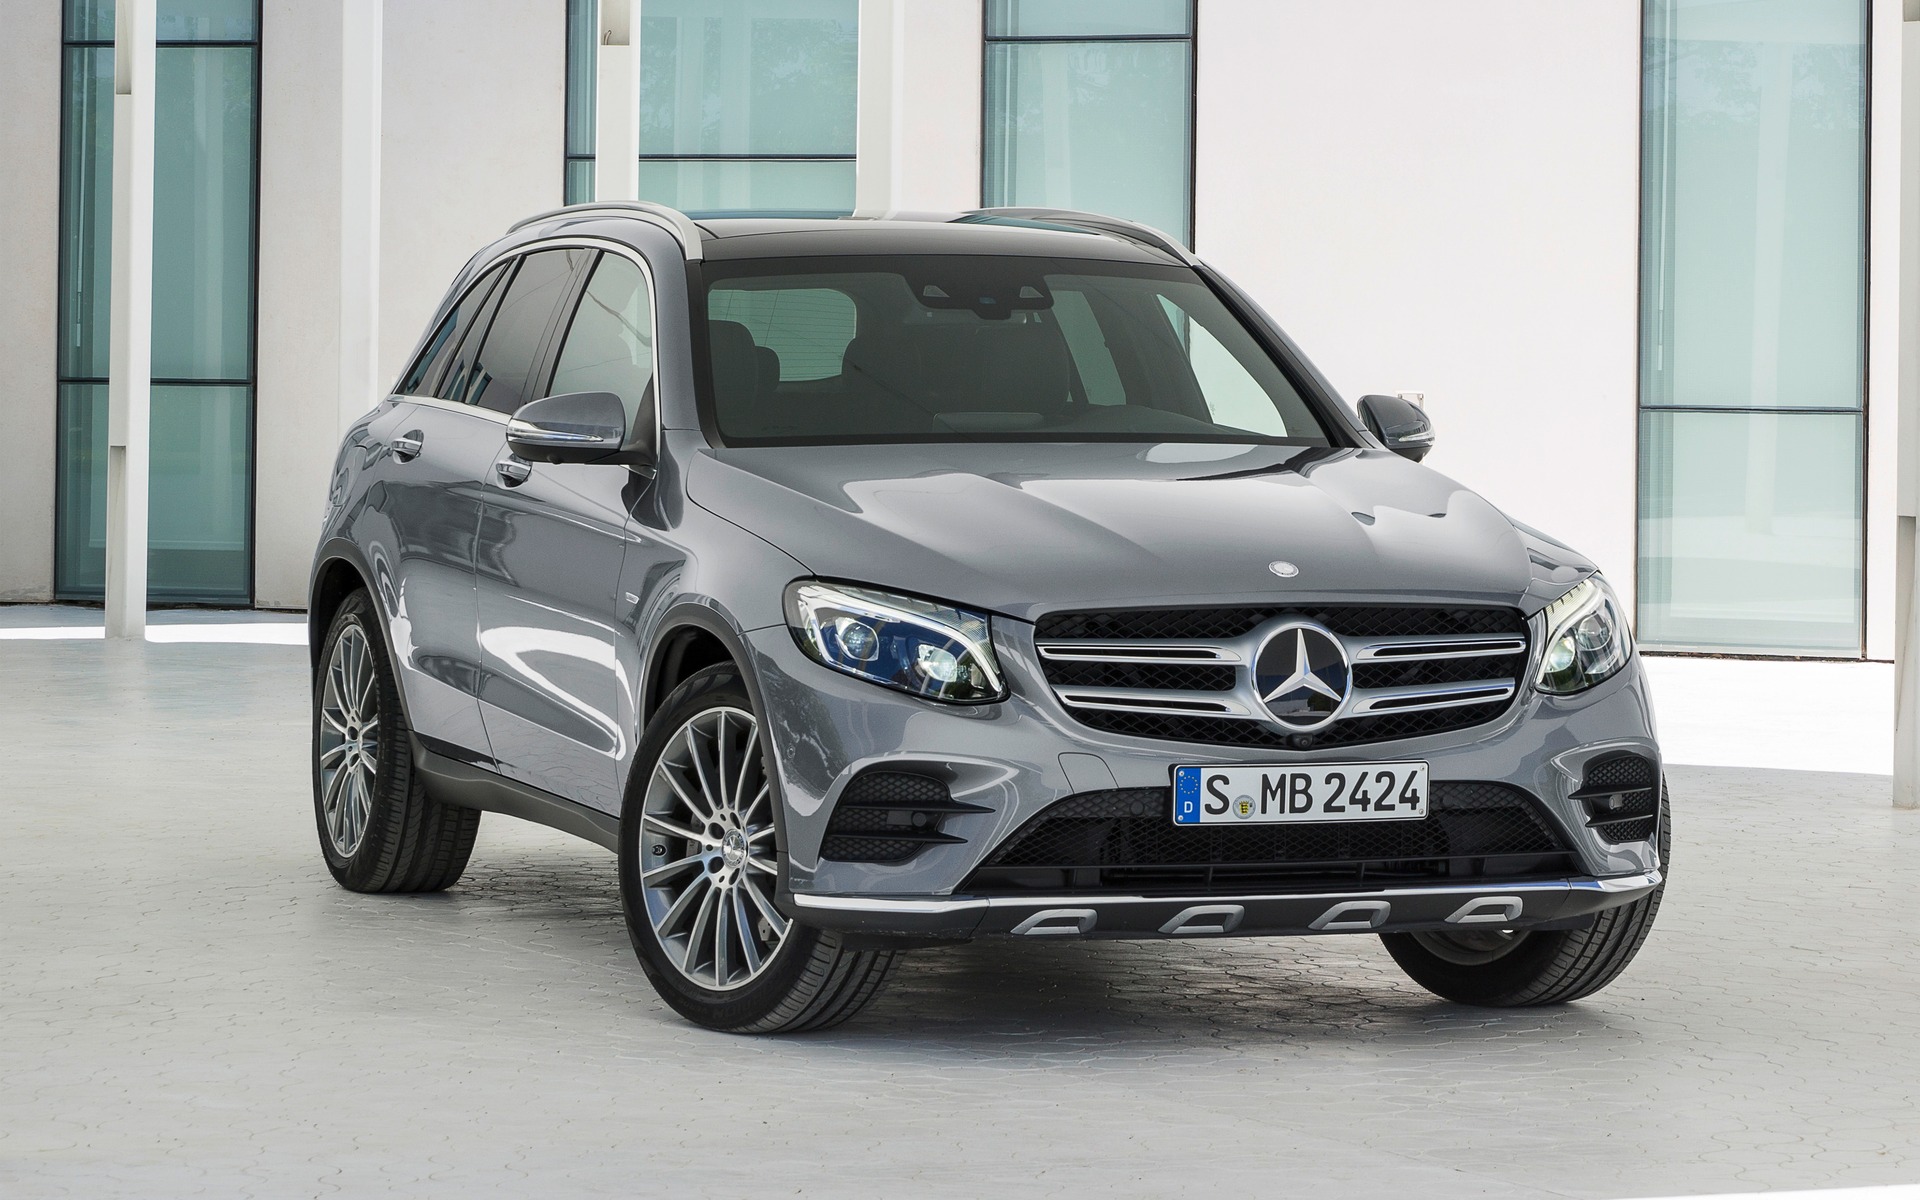 16 Mercedes Benz Glc Nothing Like The Glk The Car Guide